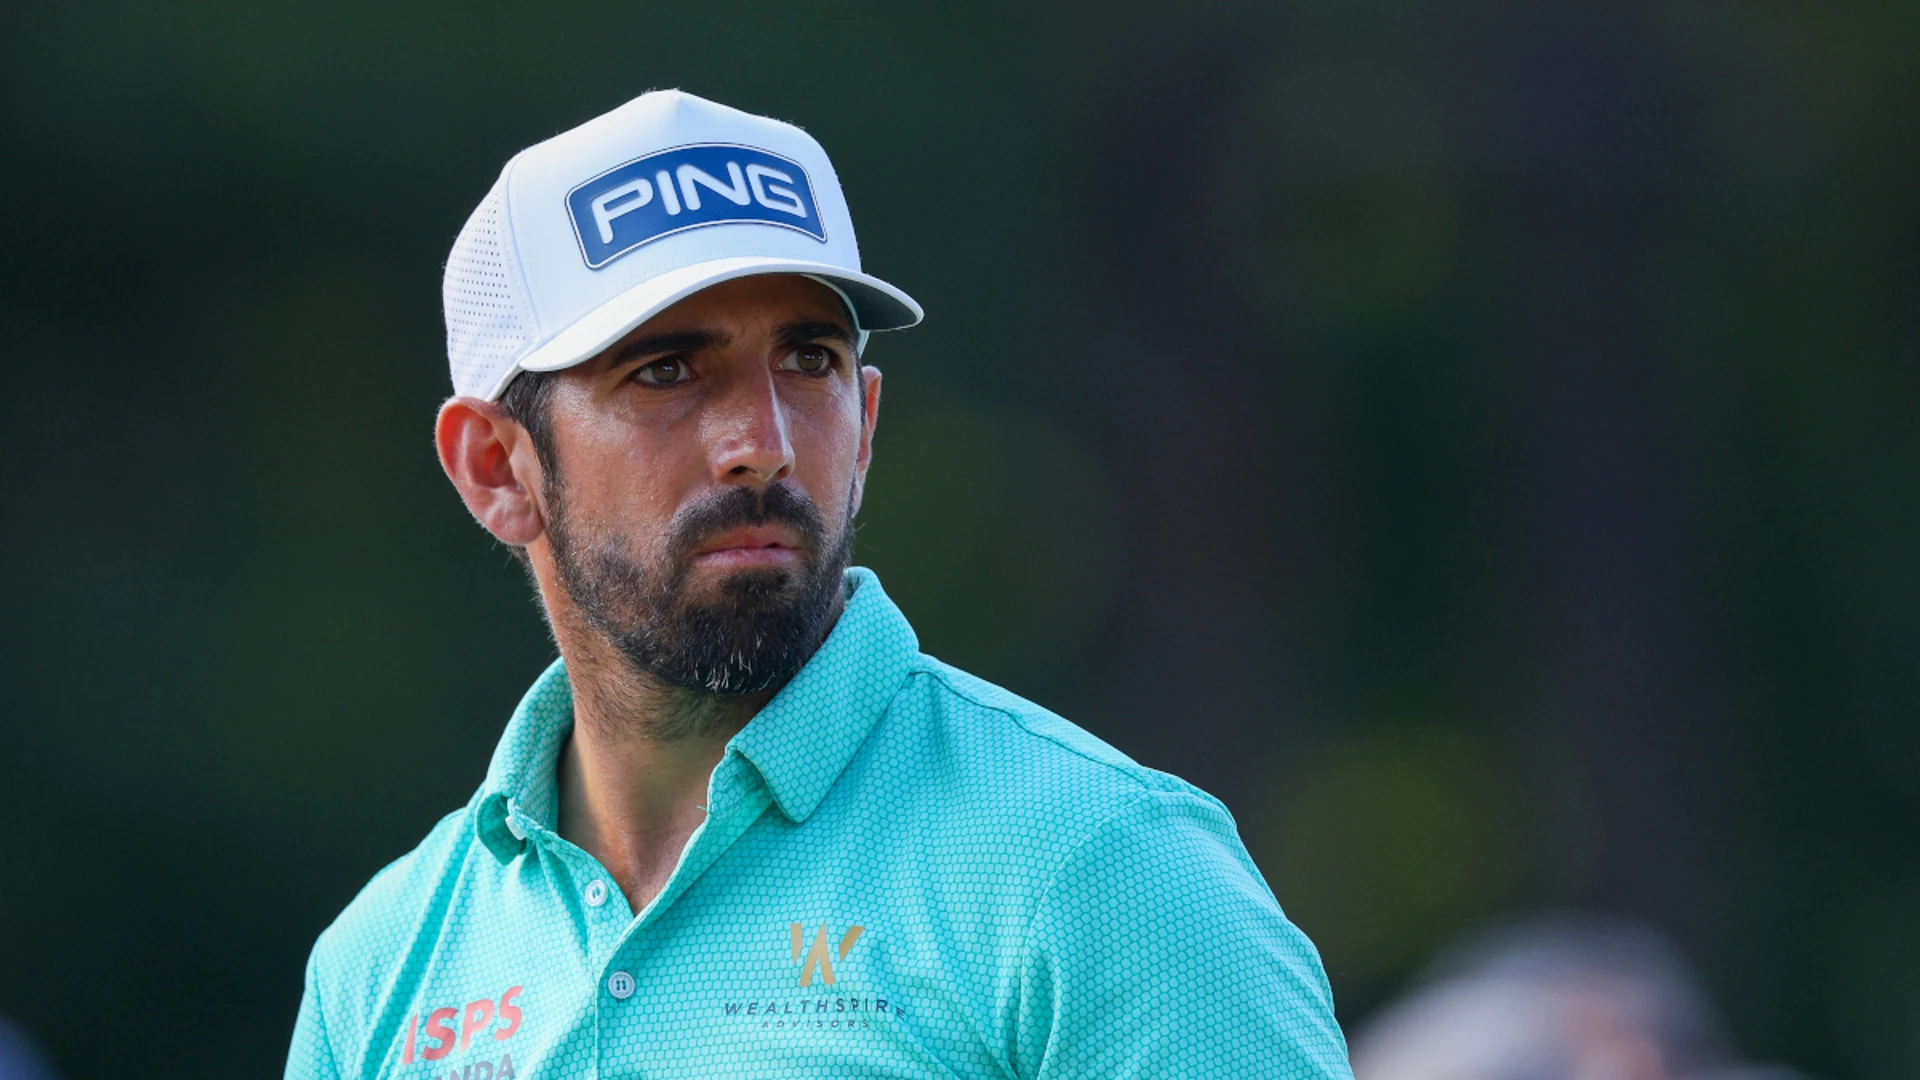 Pavon grabs US Open lead with sizzling start at Pinehurst